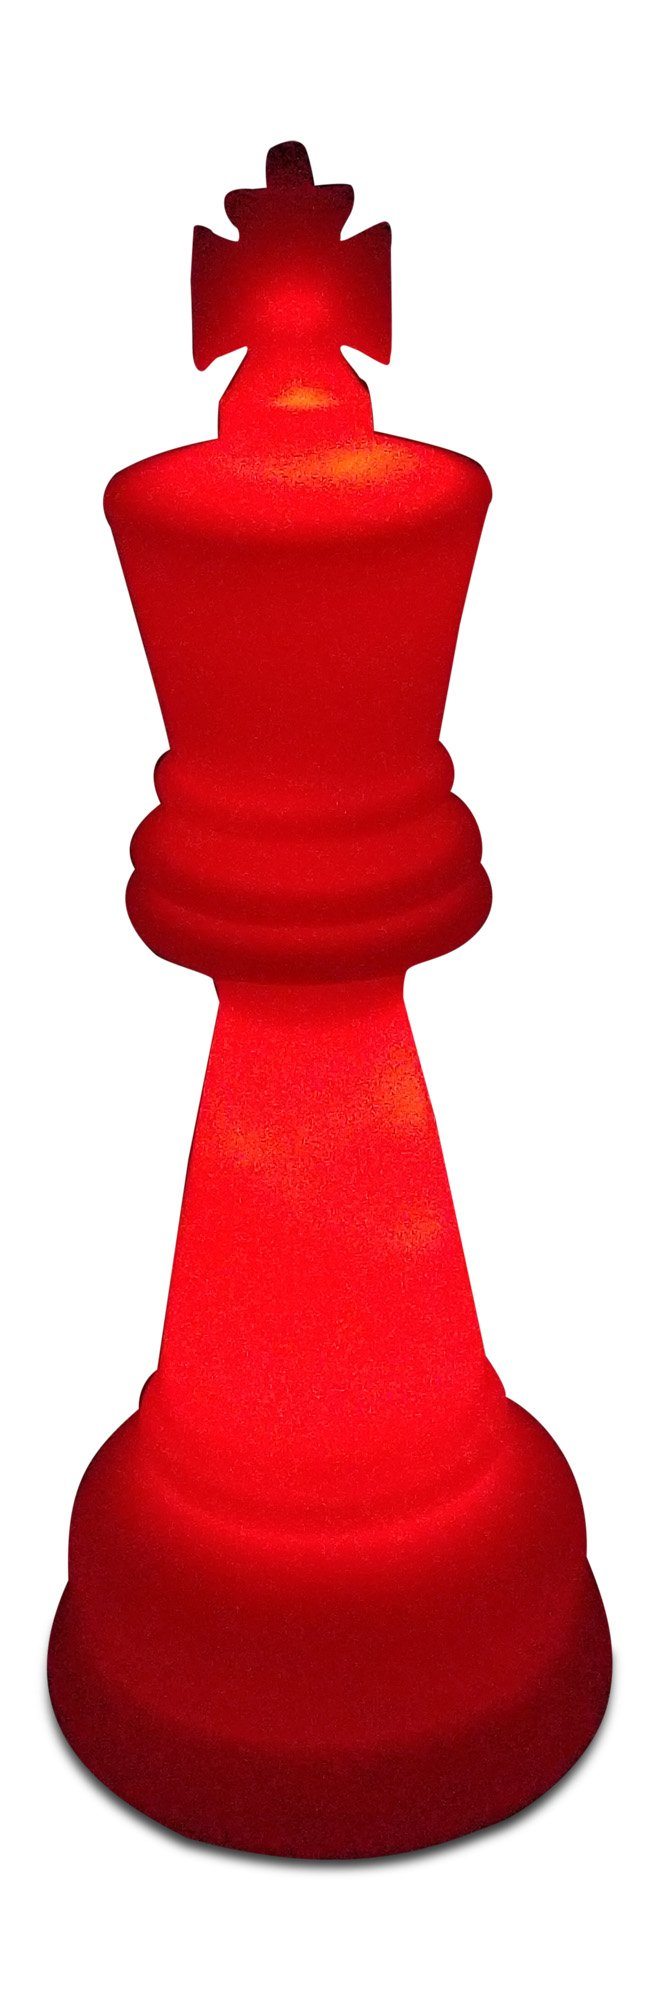 MegaChess 38 Inch Perfect King Light-Up Giant Chess Piece - Red | Default Title | MegaChess.com